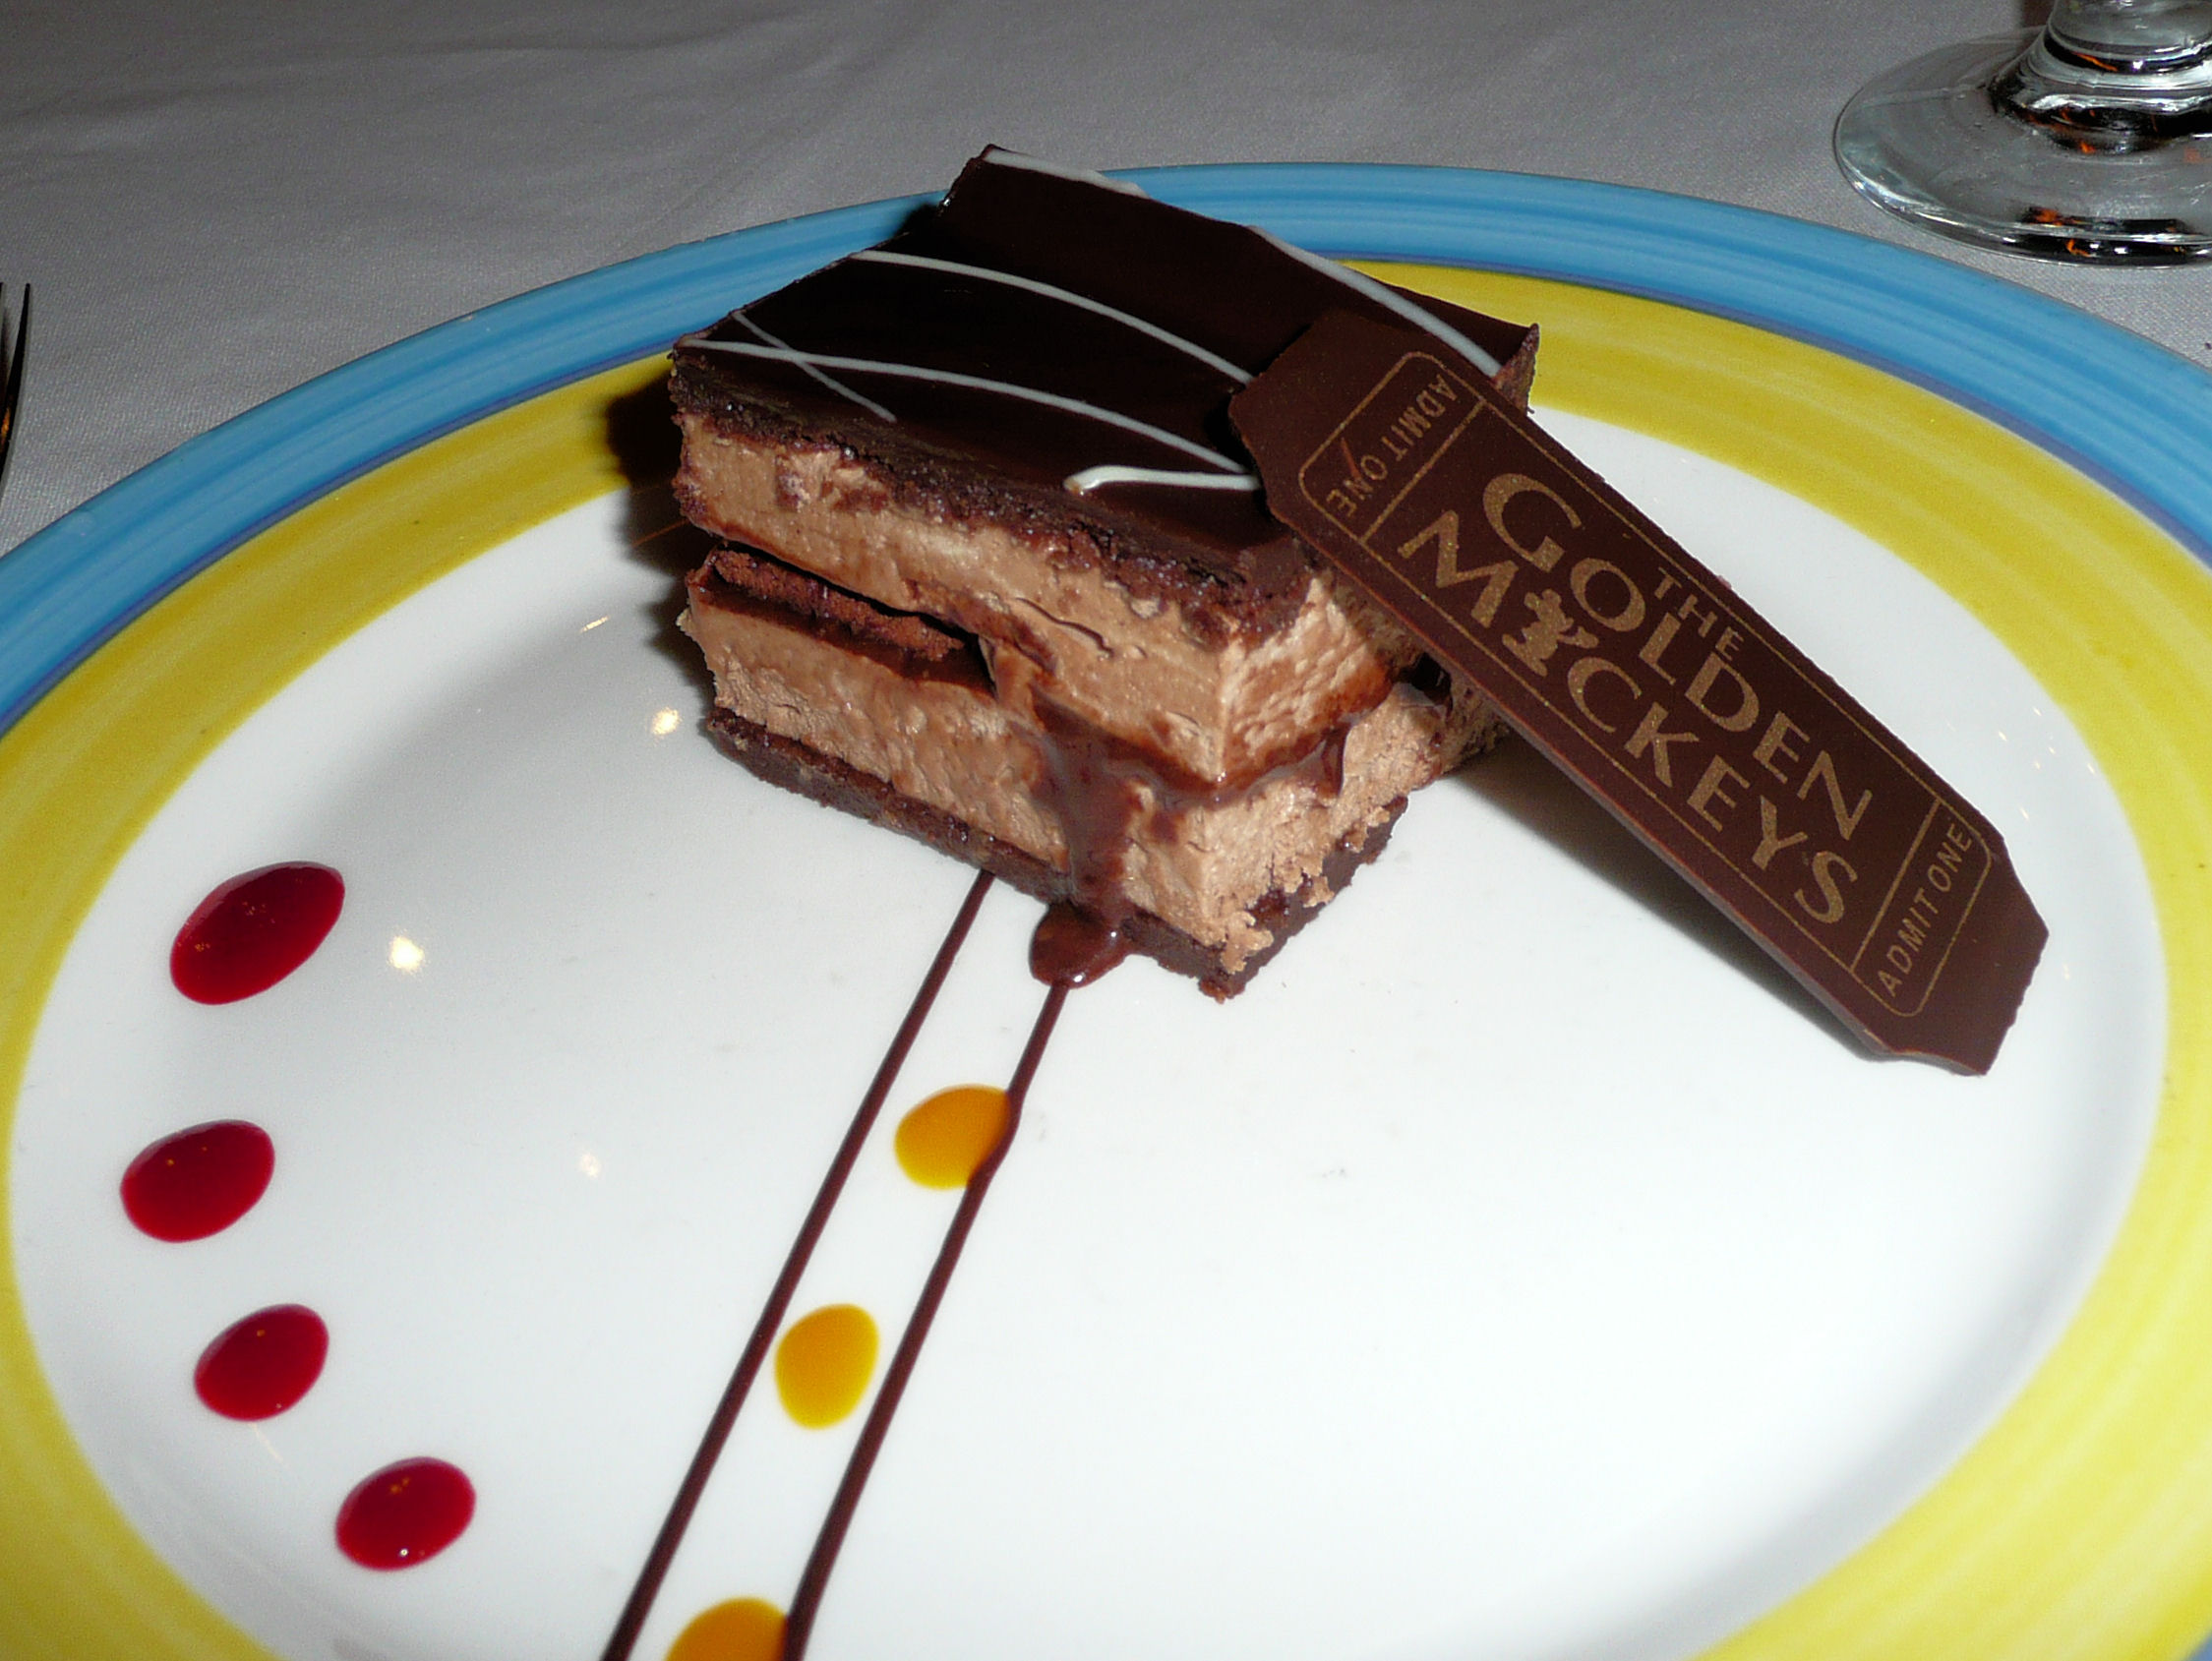 THE best dessert of our cruise on the Disney Magic!